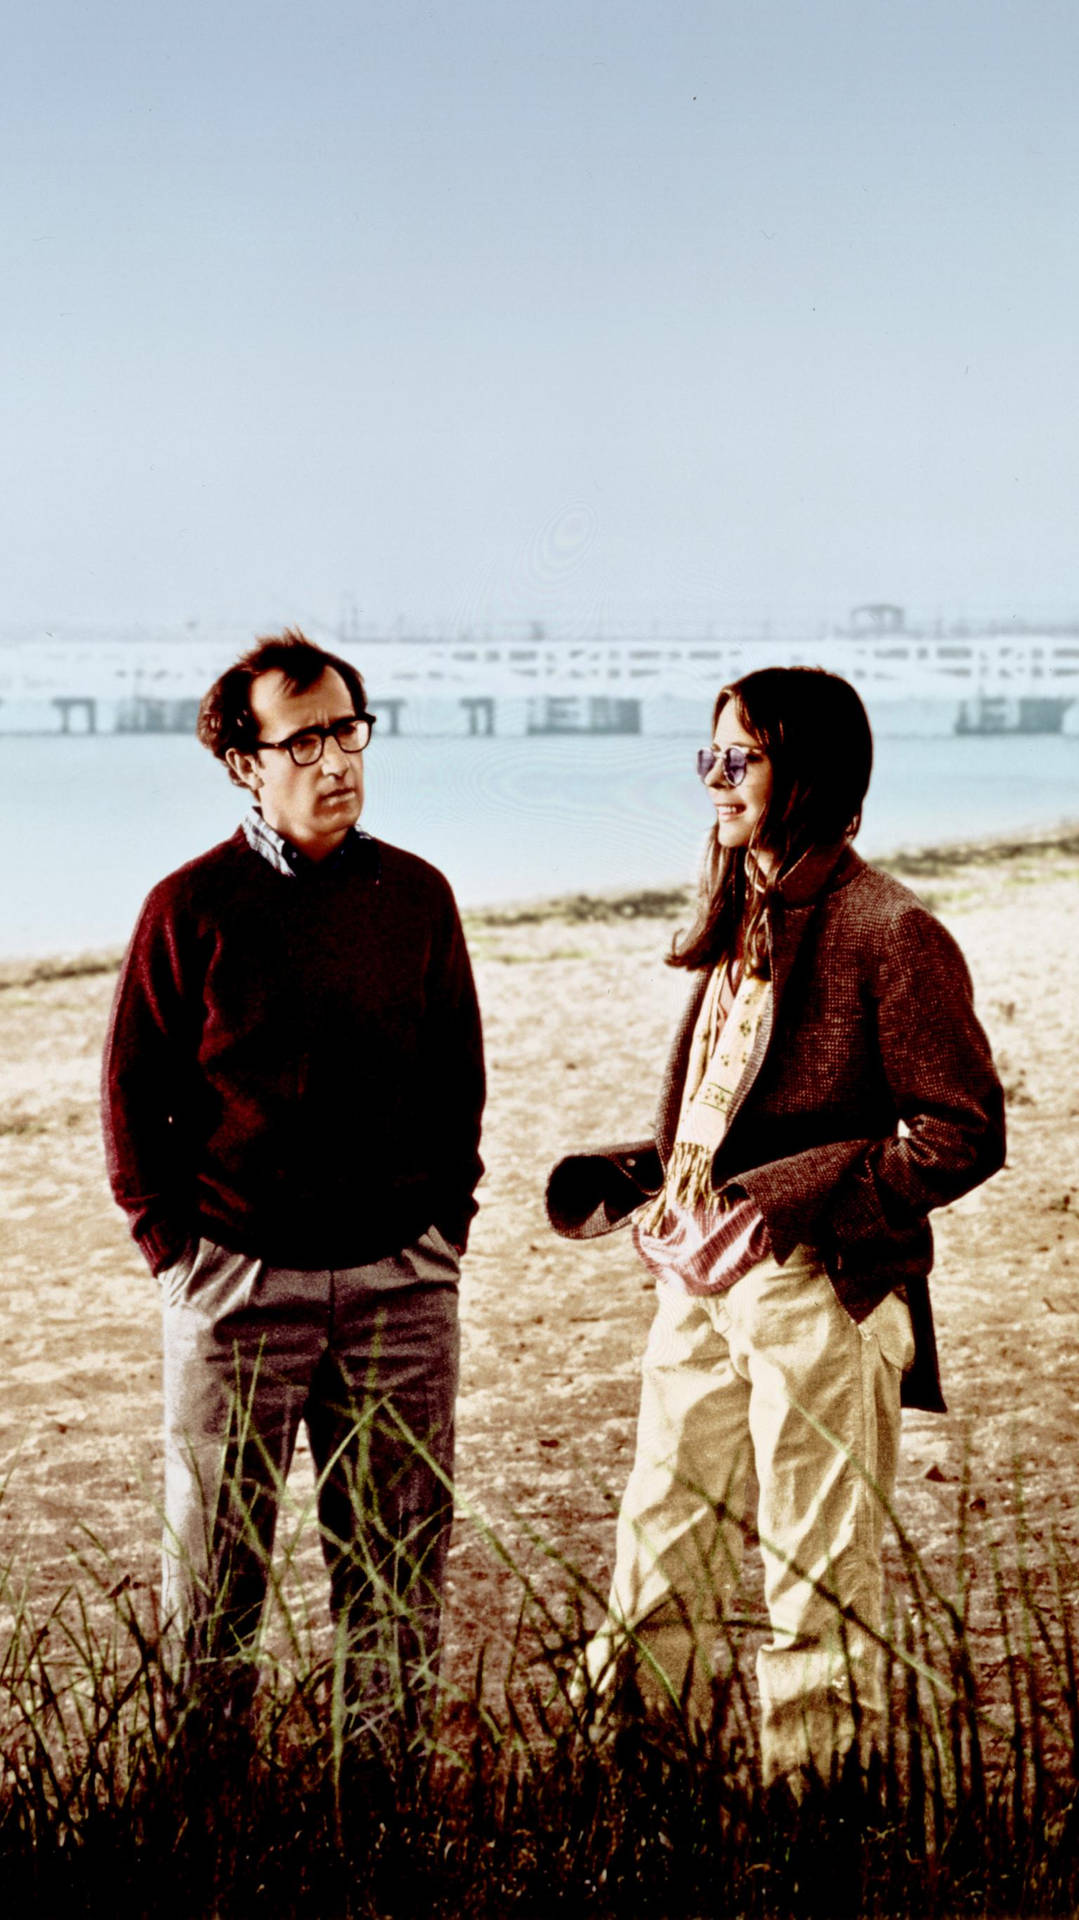 Woody Allen and Diane Keaton in iconic movie scene from 'Annie Hall'. Wallpaper